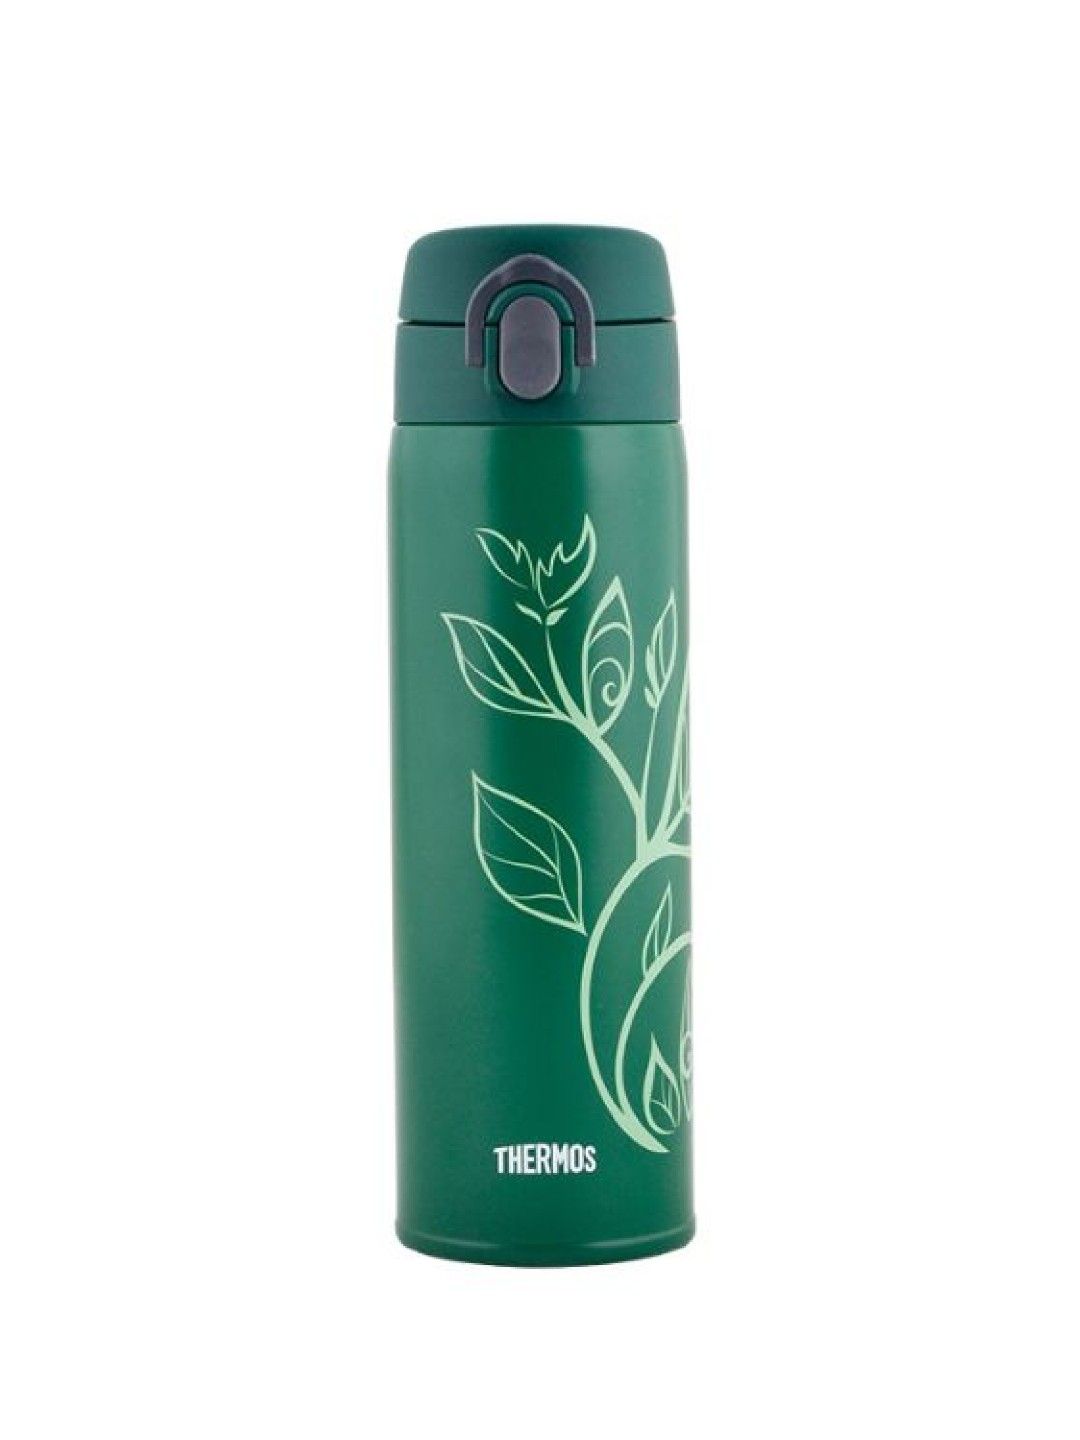 Thermos JNX-500P Insulated Drinking One Push Tumbler - Save the Earth/Green (500ml)